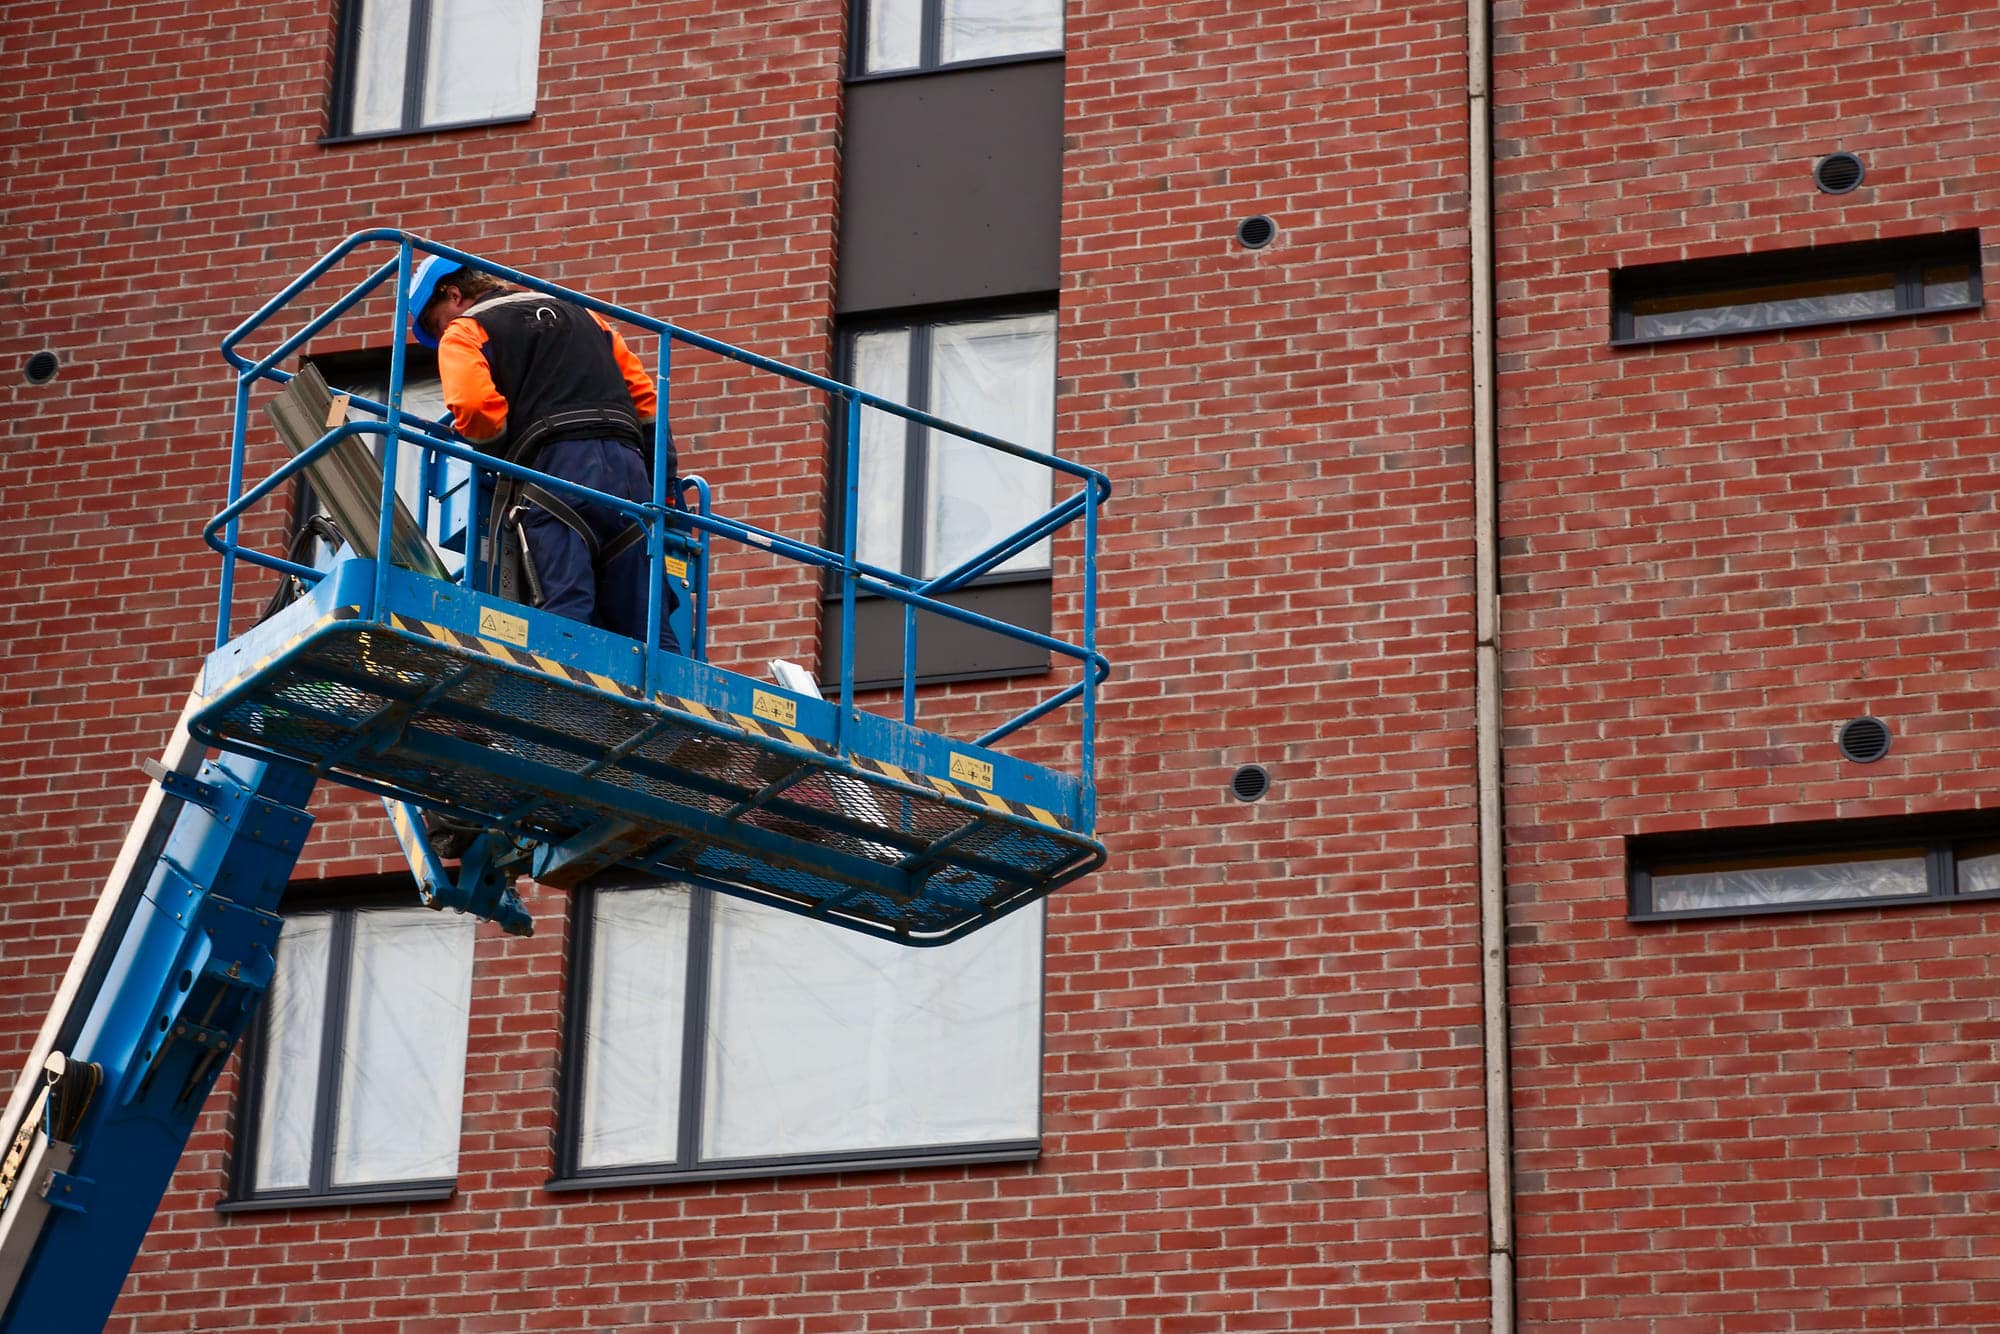 BOOM LIFT ACCIDENT LAWYER IN THE CITY OF NEW YORK